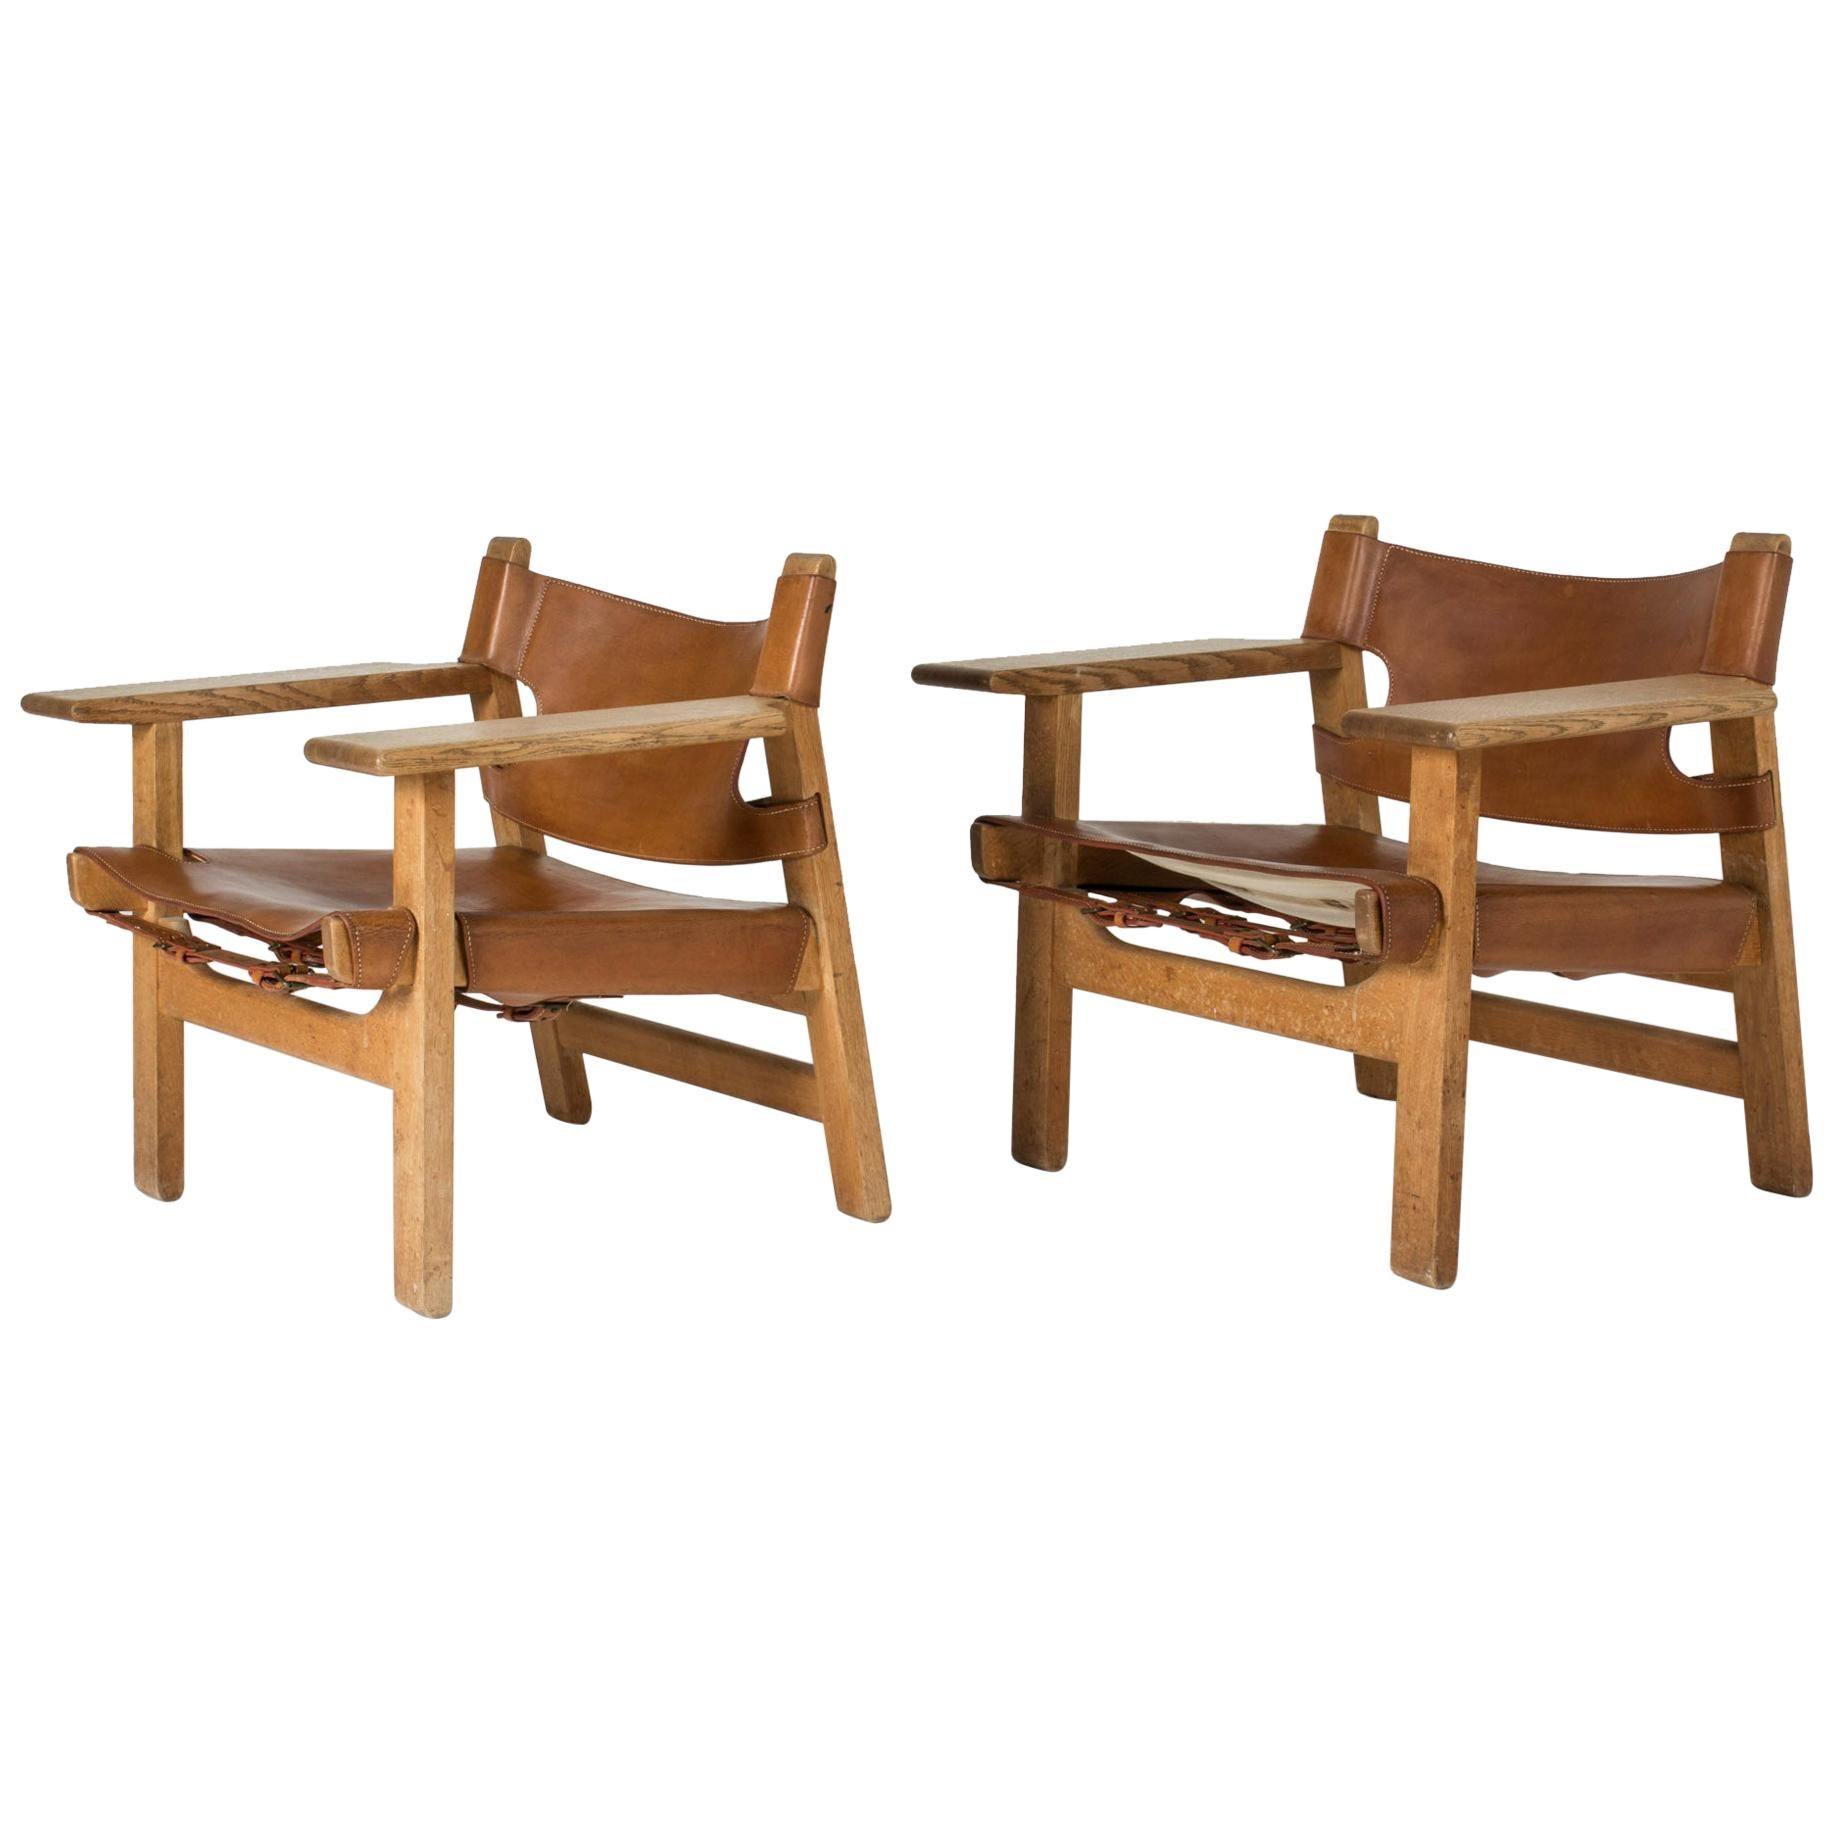 Pair of "Spanish Chairs" by Børge Mogensen